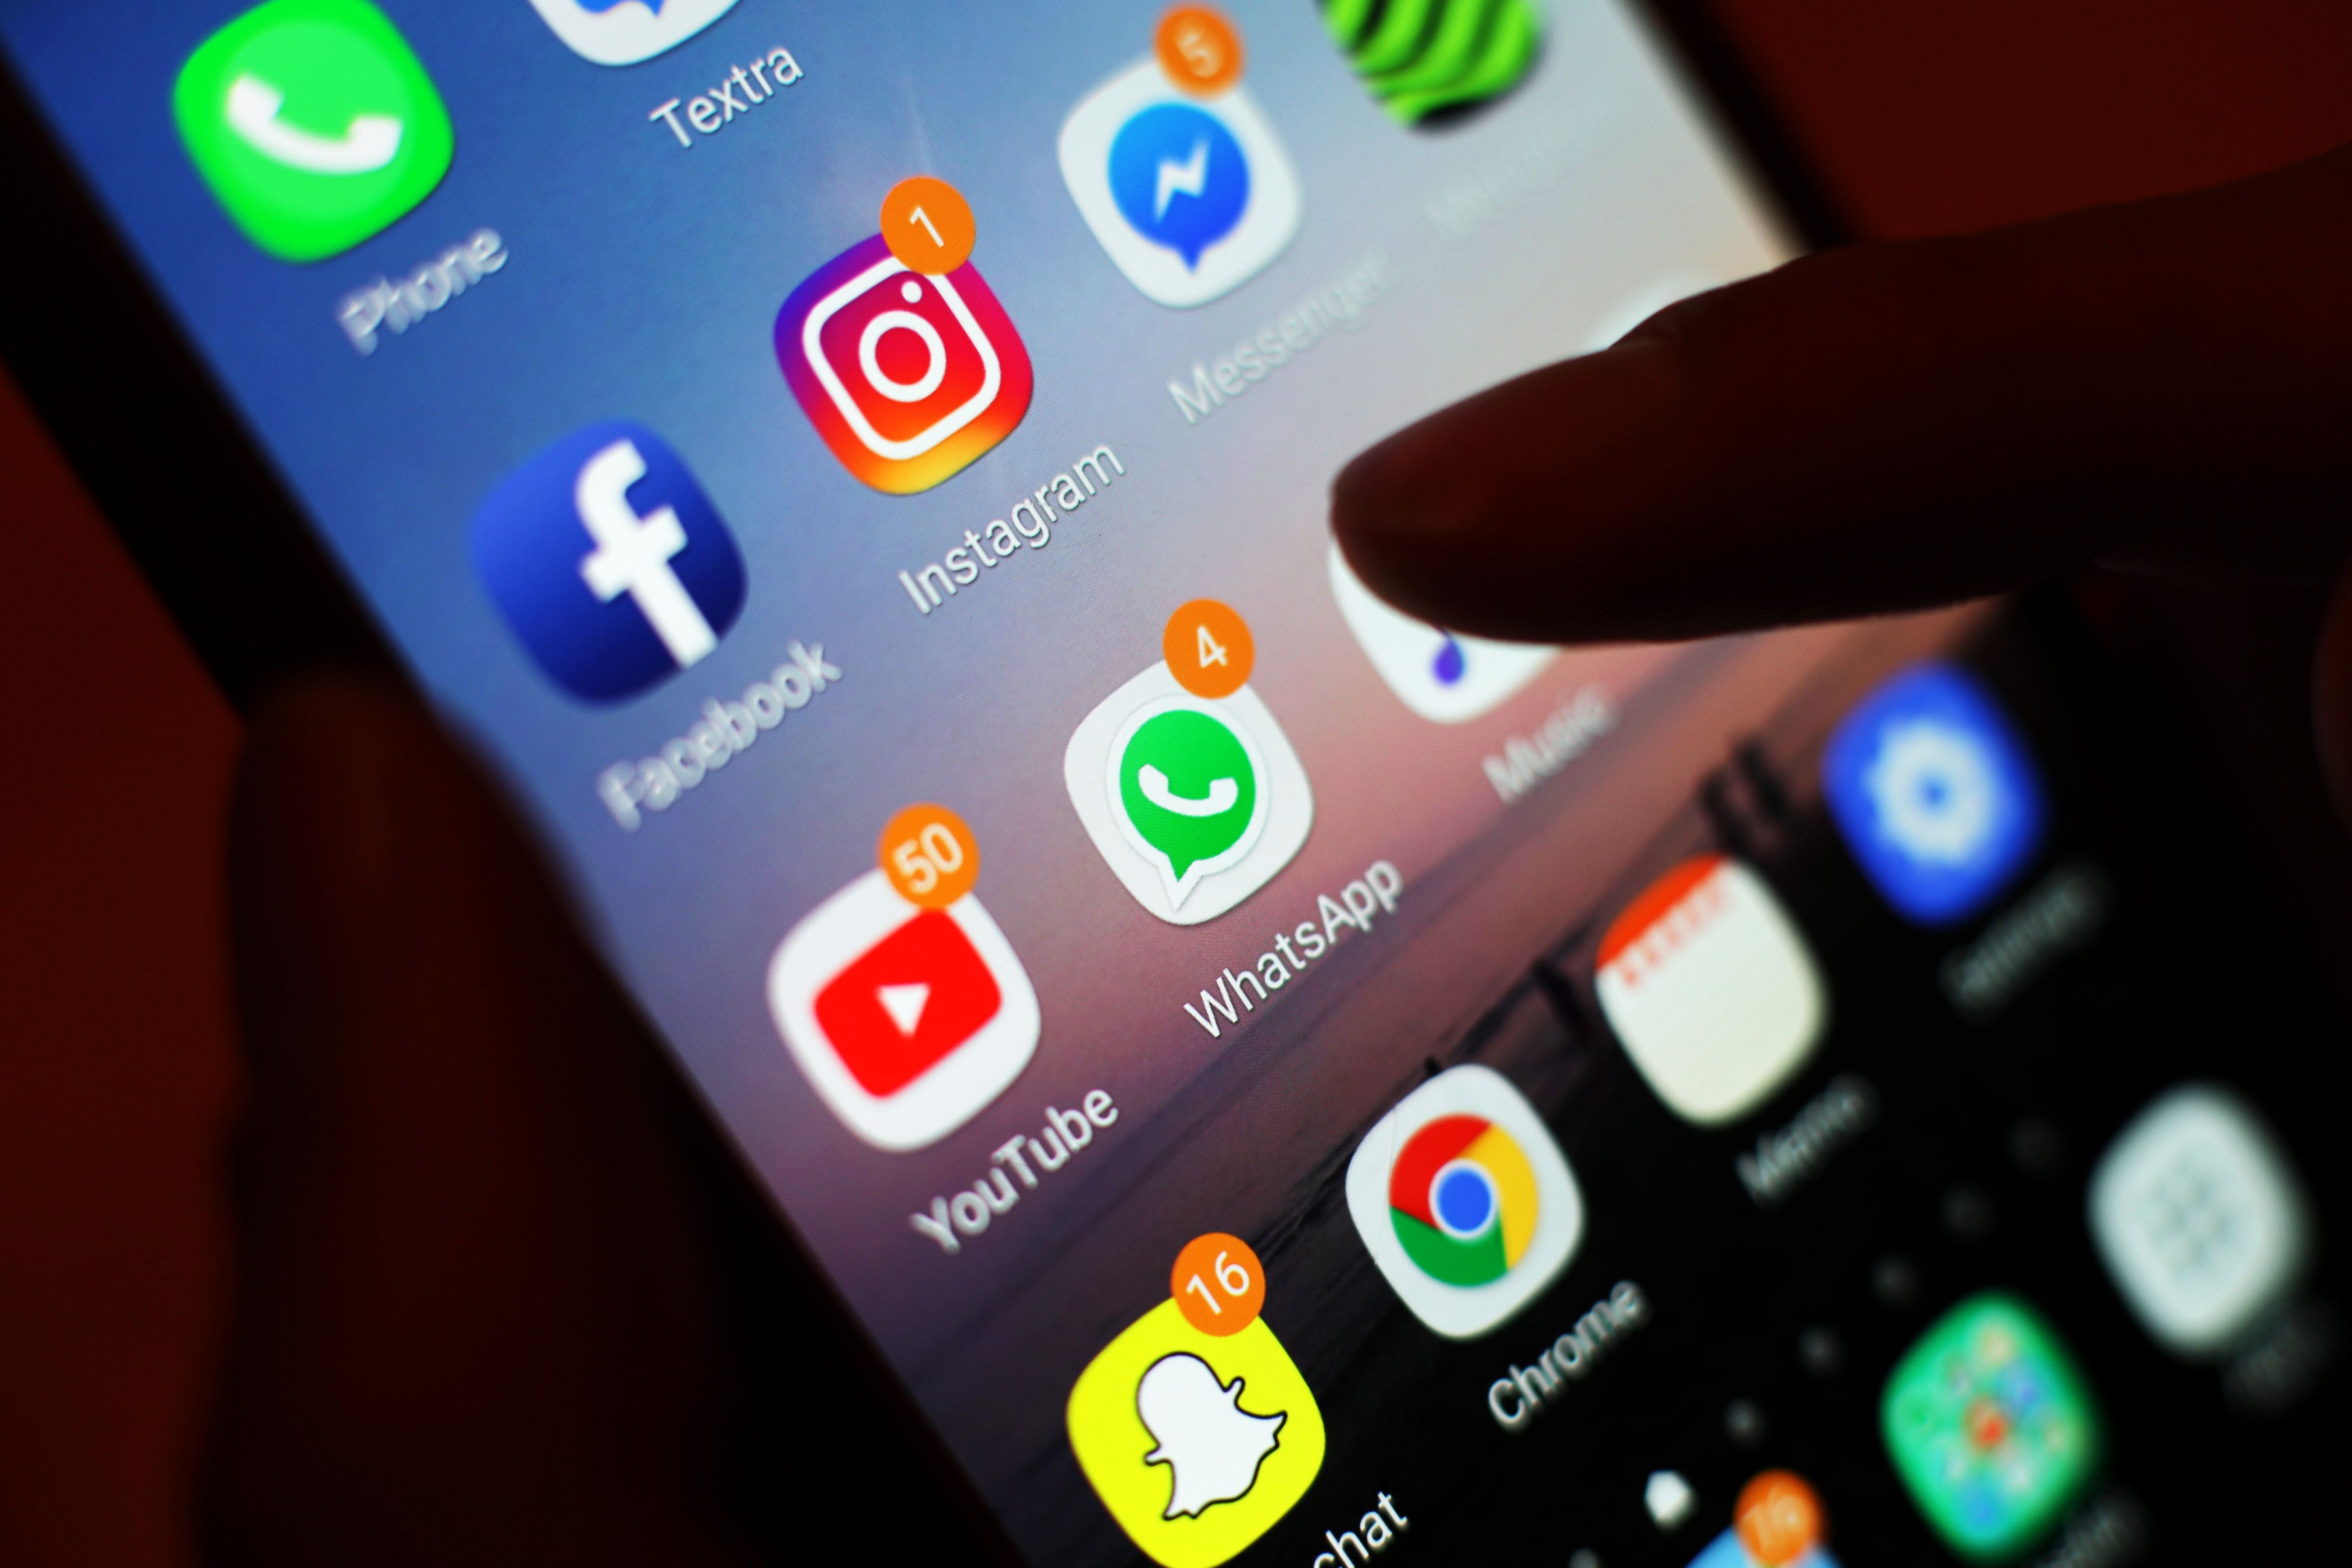 “Our research clearly shows a lack of trust in social media platforms, with so many respondents having been affected by a form of sexual harassment”